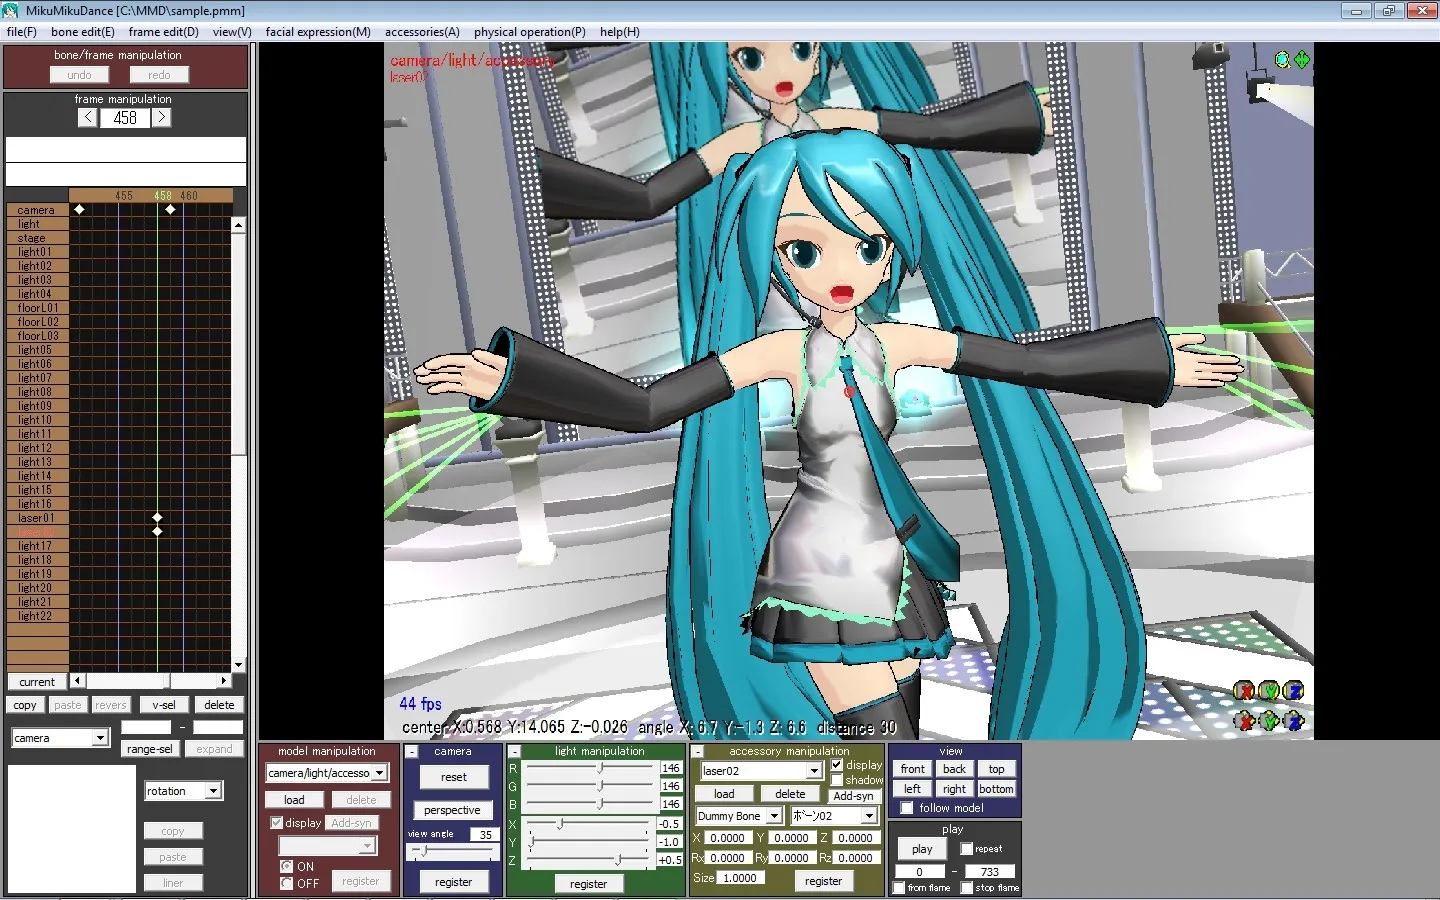 You'll Soon Be Able To Create Your Own Hatsune Miku Videos With  MikuMikuDance - Siliconera